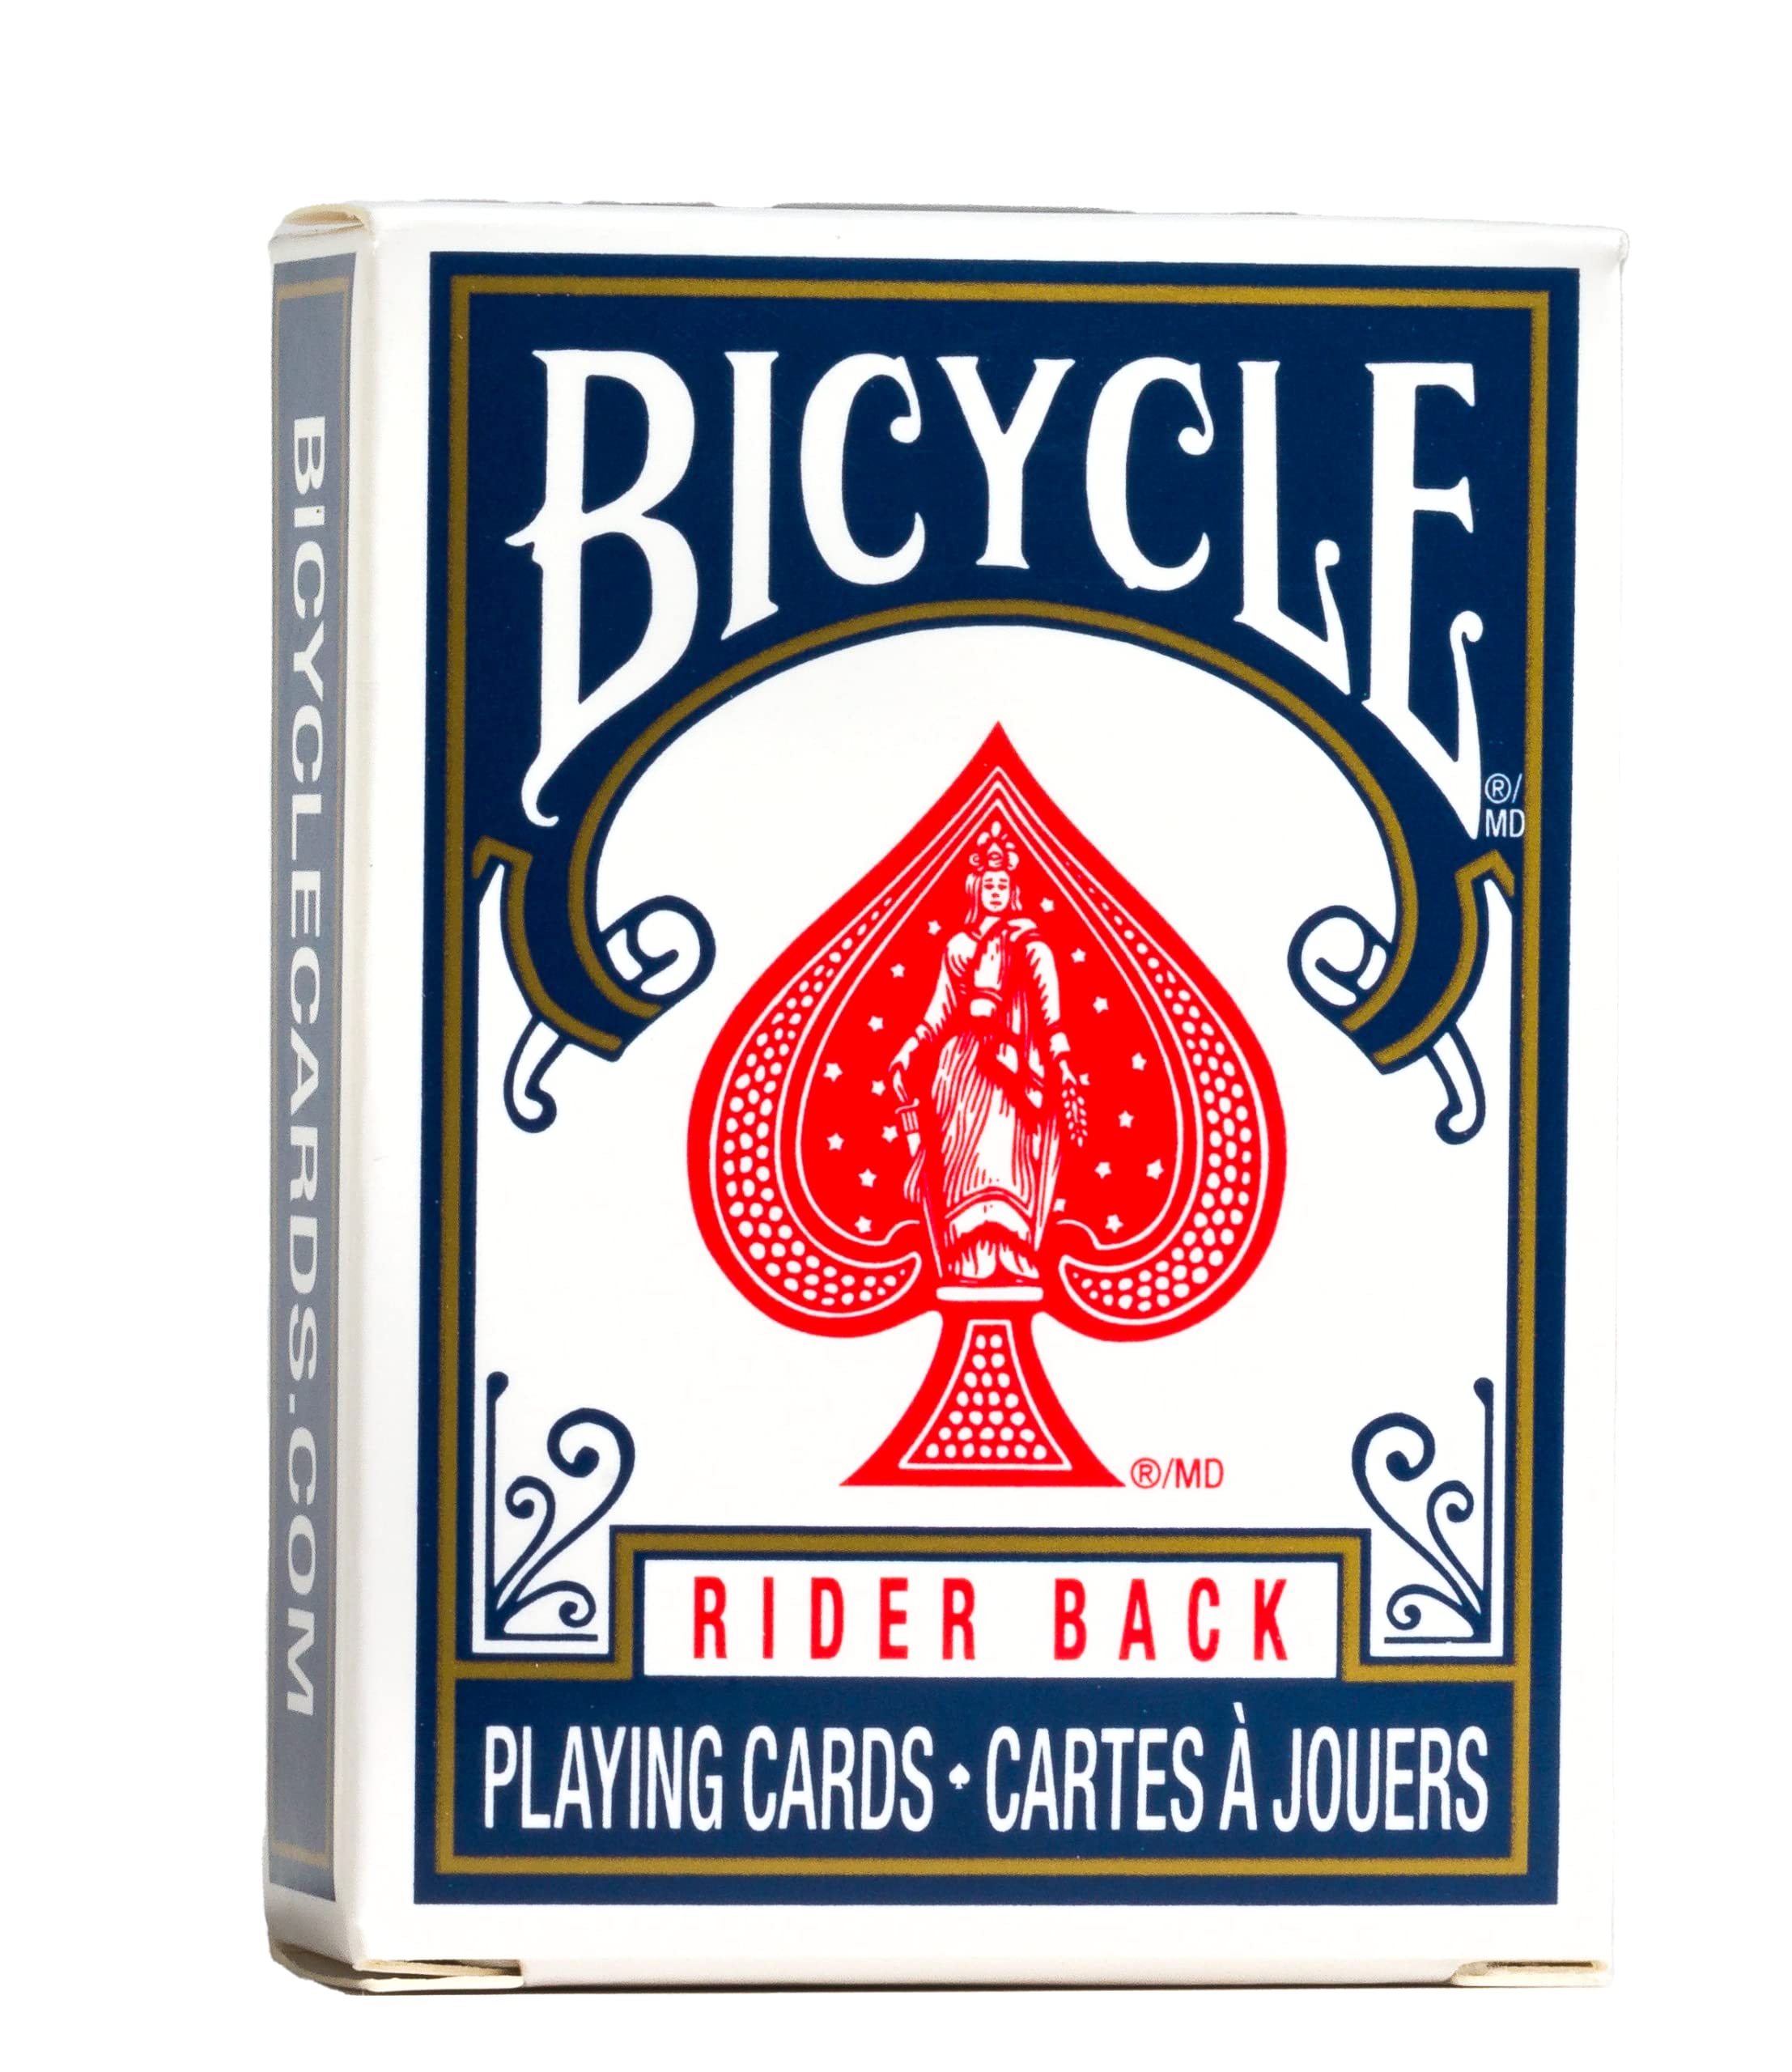 Bicycle Mini Decks Playing Cards - Single Deck - (Color May Vary) - Smaller Than Traditional Deck